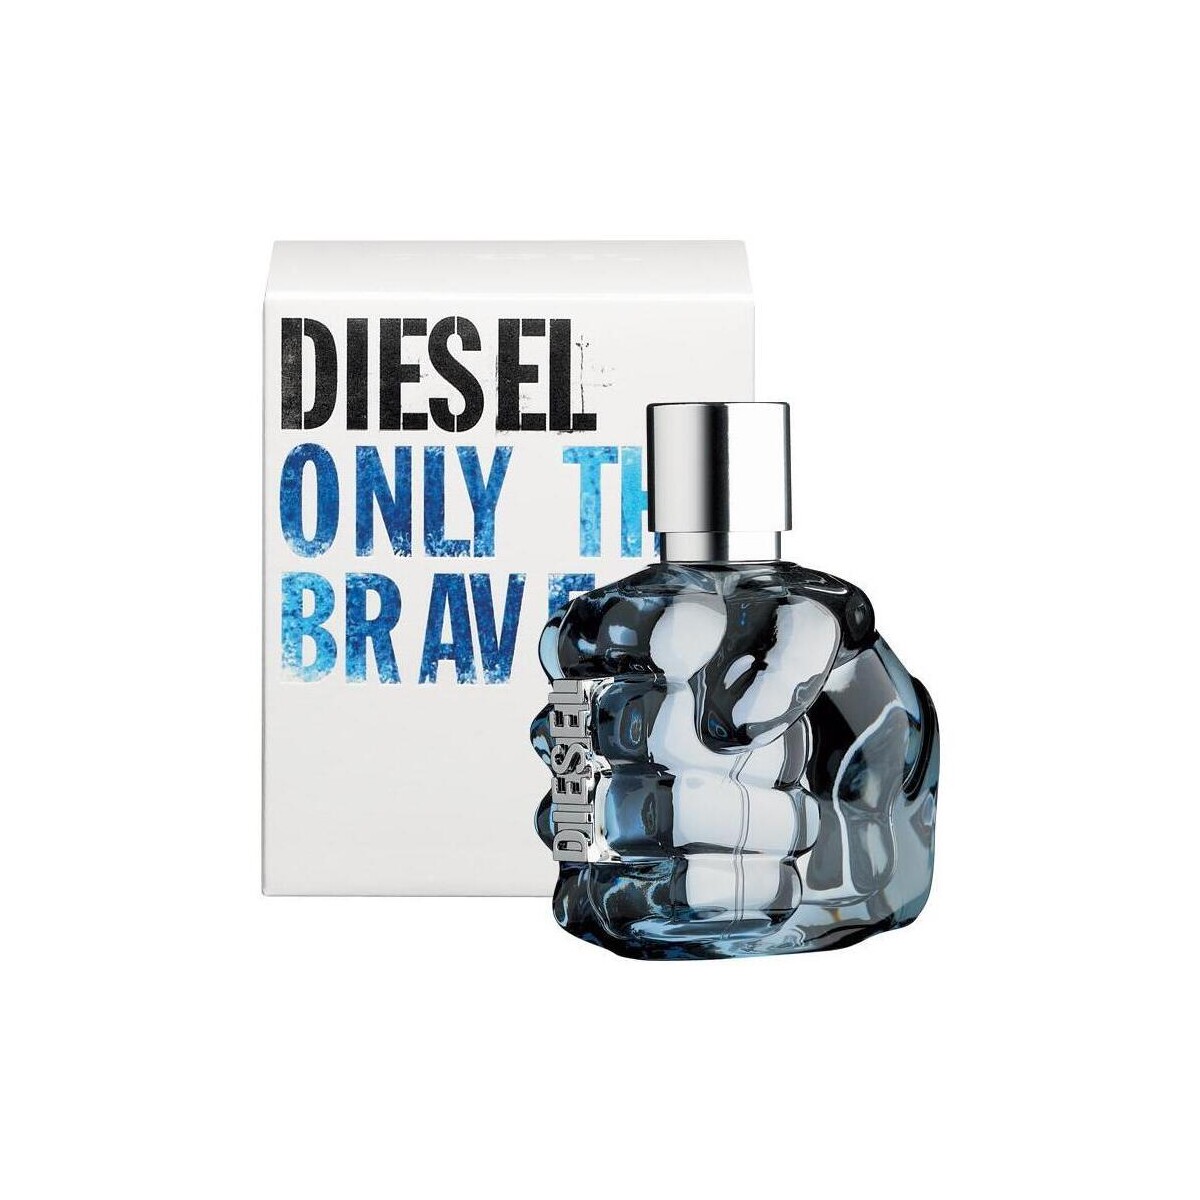 Diesel Only The Brave - cologne - 200ml - spray Only Th